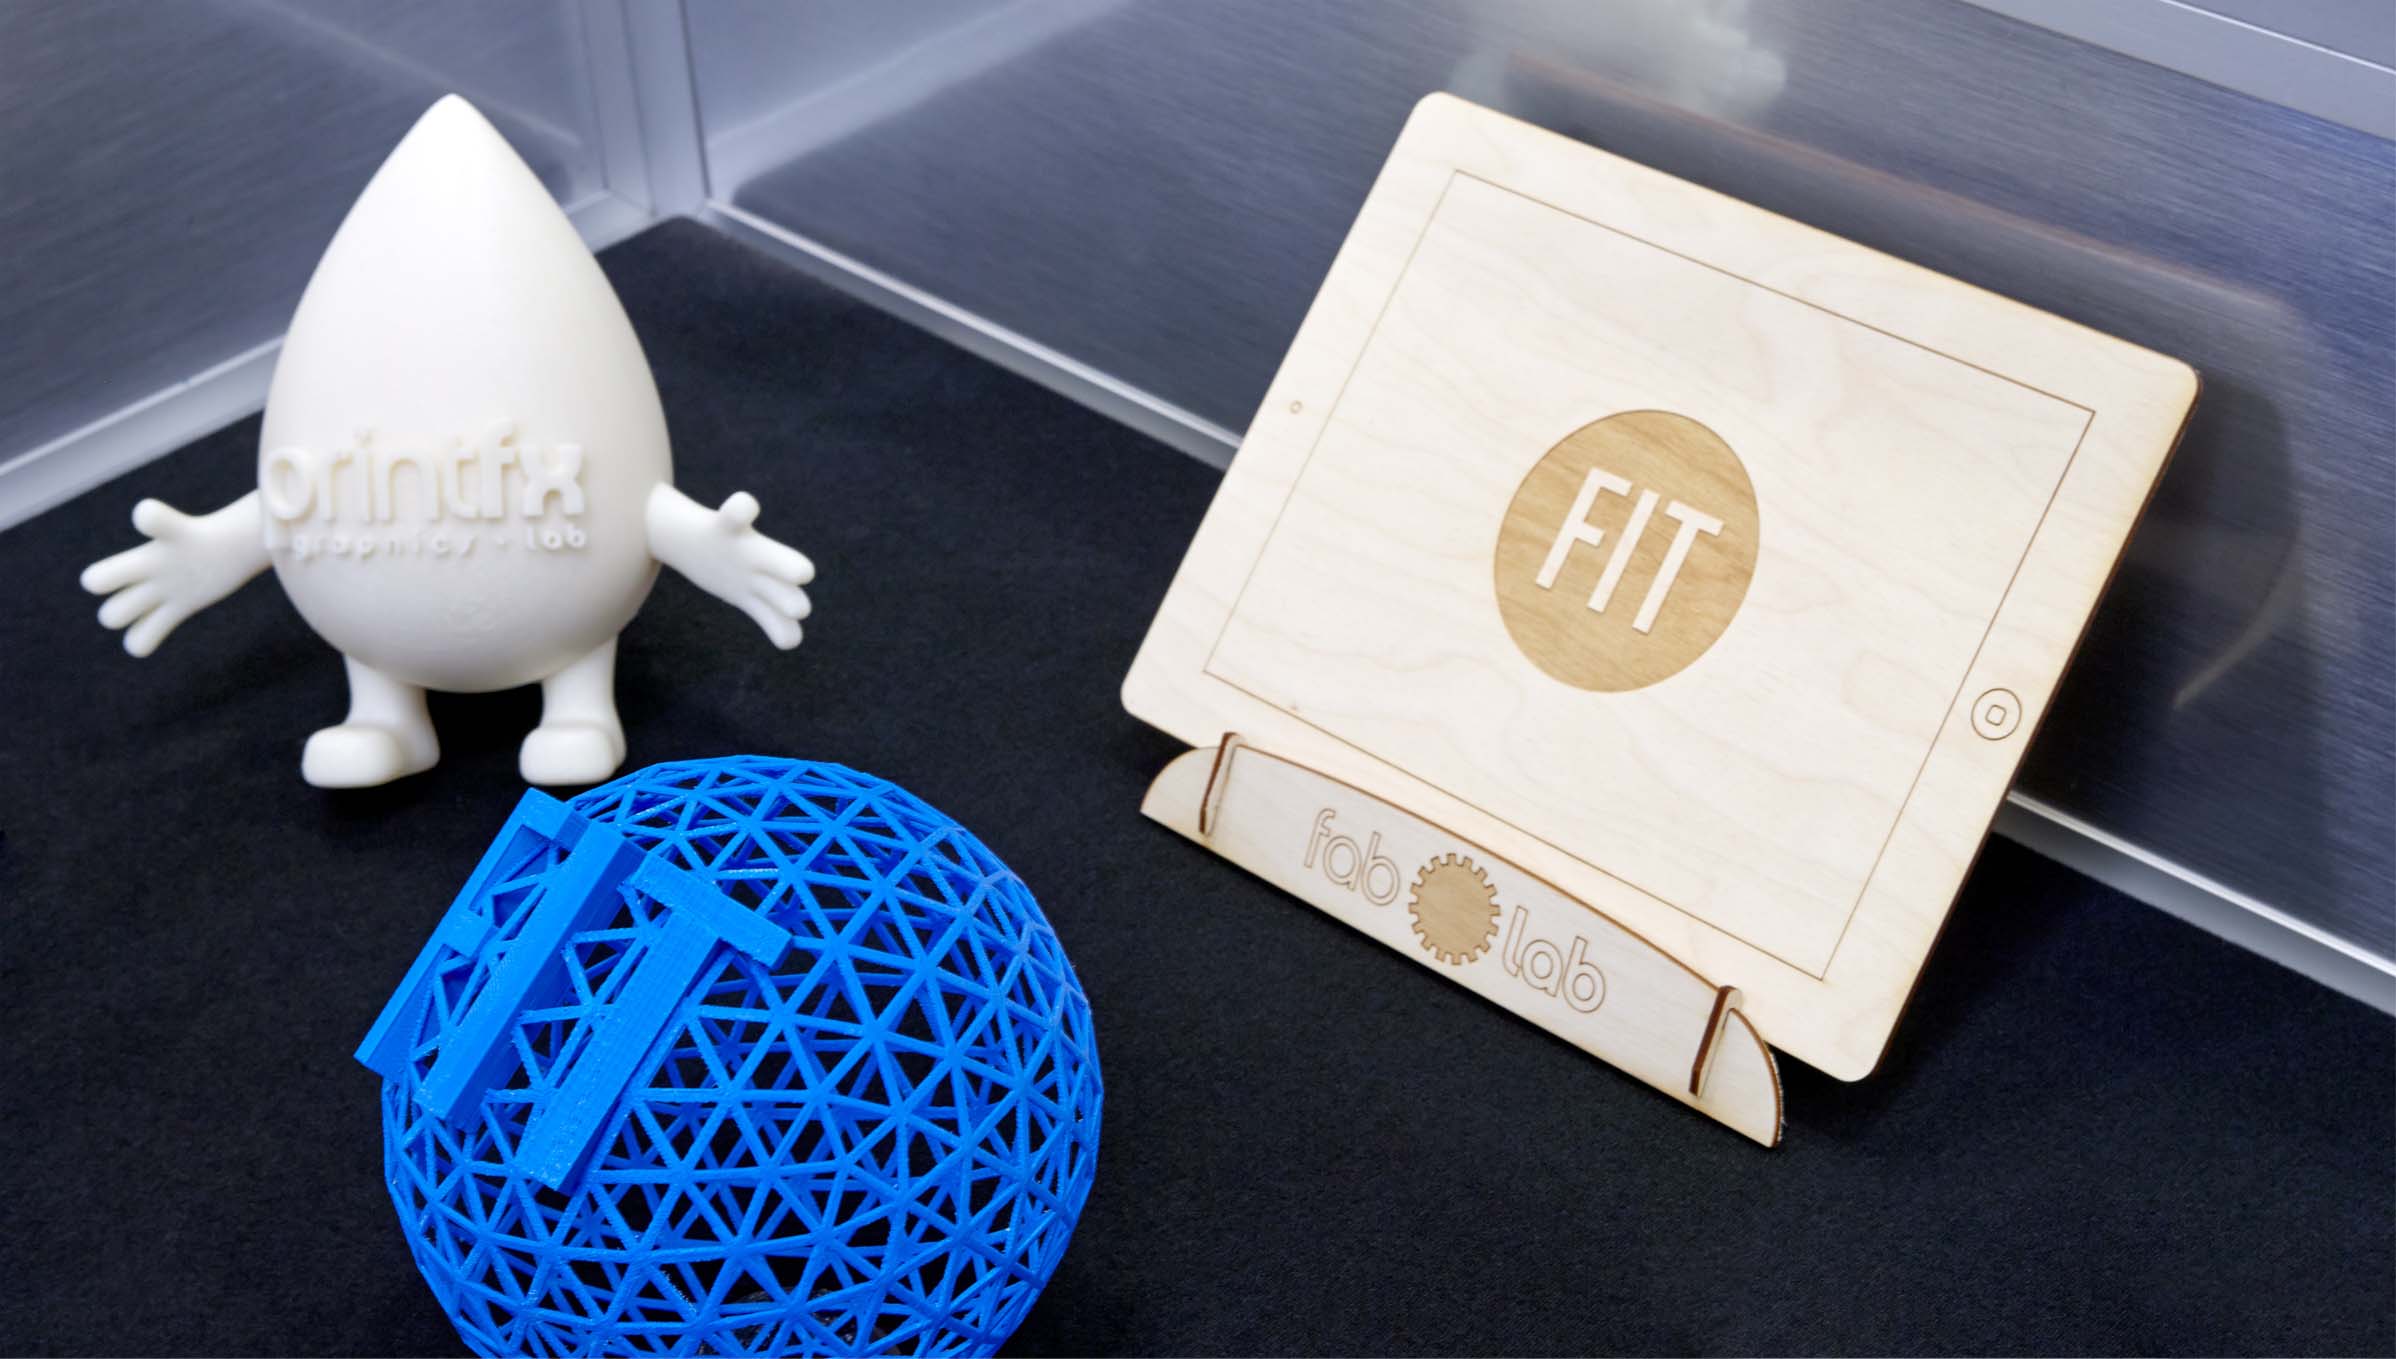 fabrication examples produced at PrintFX, 3d print, laser cut